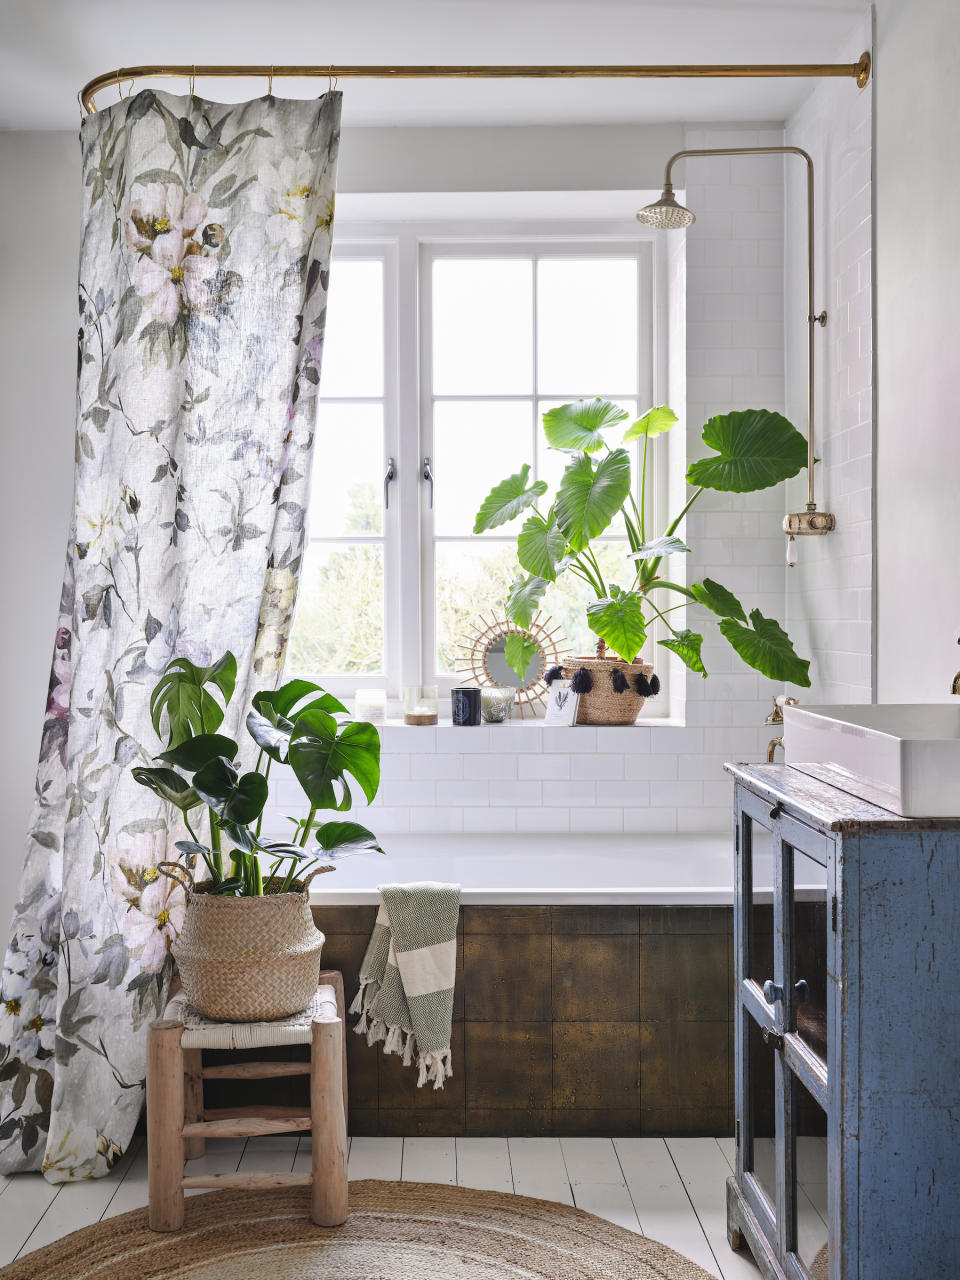 <p> Foliage and floral motifs are a key motif in country-style fabrics and wallpapers. But bringing living nature into your home in the form of plants and flowers will give an extra dimension to your decor. </p> <p> Use the sculptural forms of house plants to add drama, color and movement to schemes. Choose your greenery to suit the room &#x2013; moisture-loving for a bathroom, for example, or shade tolerant in a room that doesn&apos;t get much sun. </p> <p> Forage for foliage and blossom-heavy branches, or buy locally grown flowers, to create seasonal displays. It&apos;s a wonderful to way to showcase the beauty of nature in your home. </p>